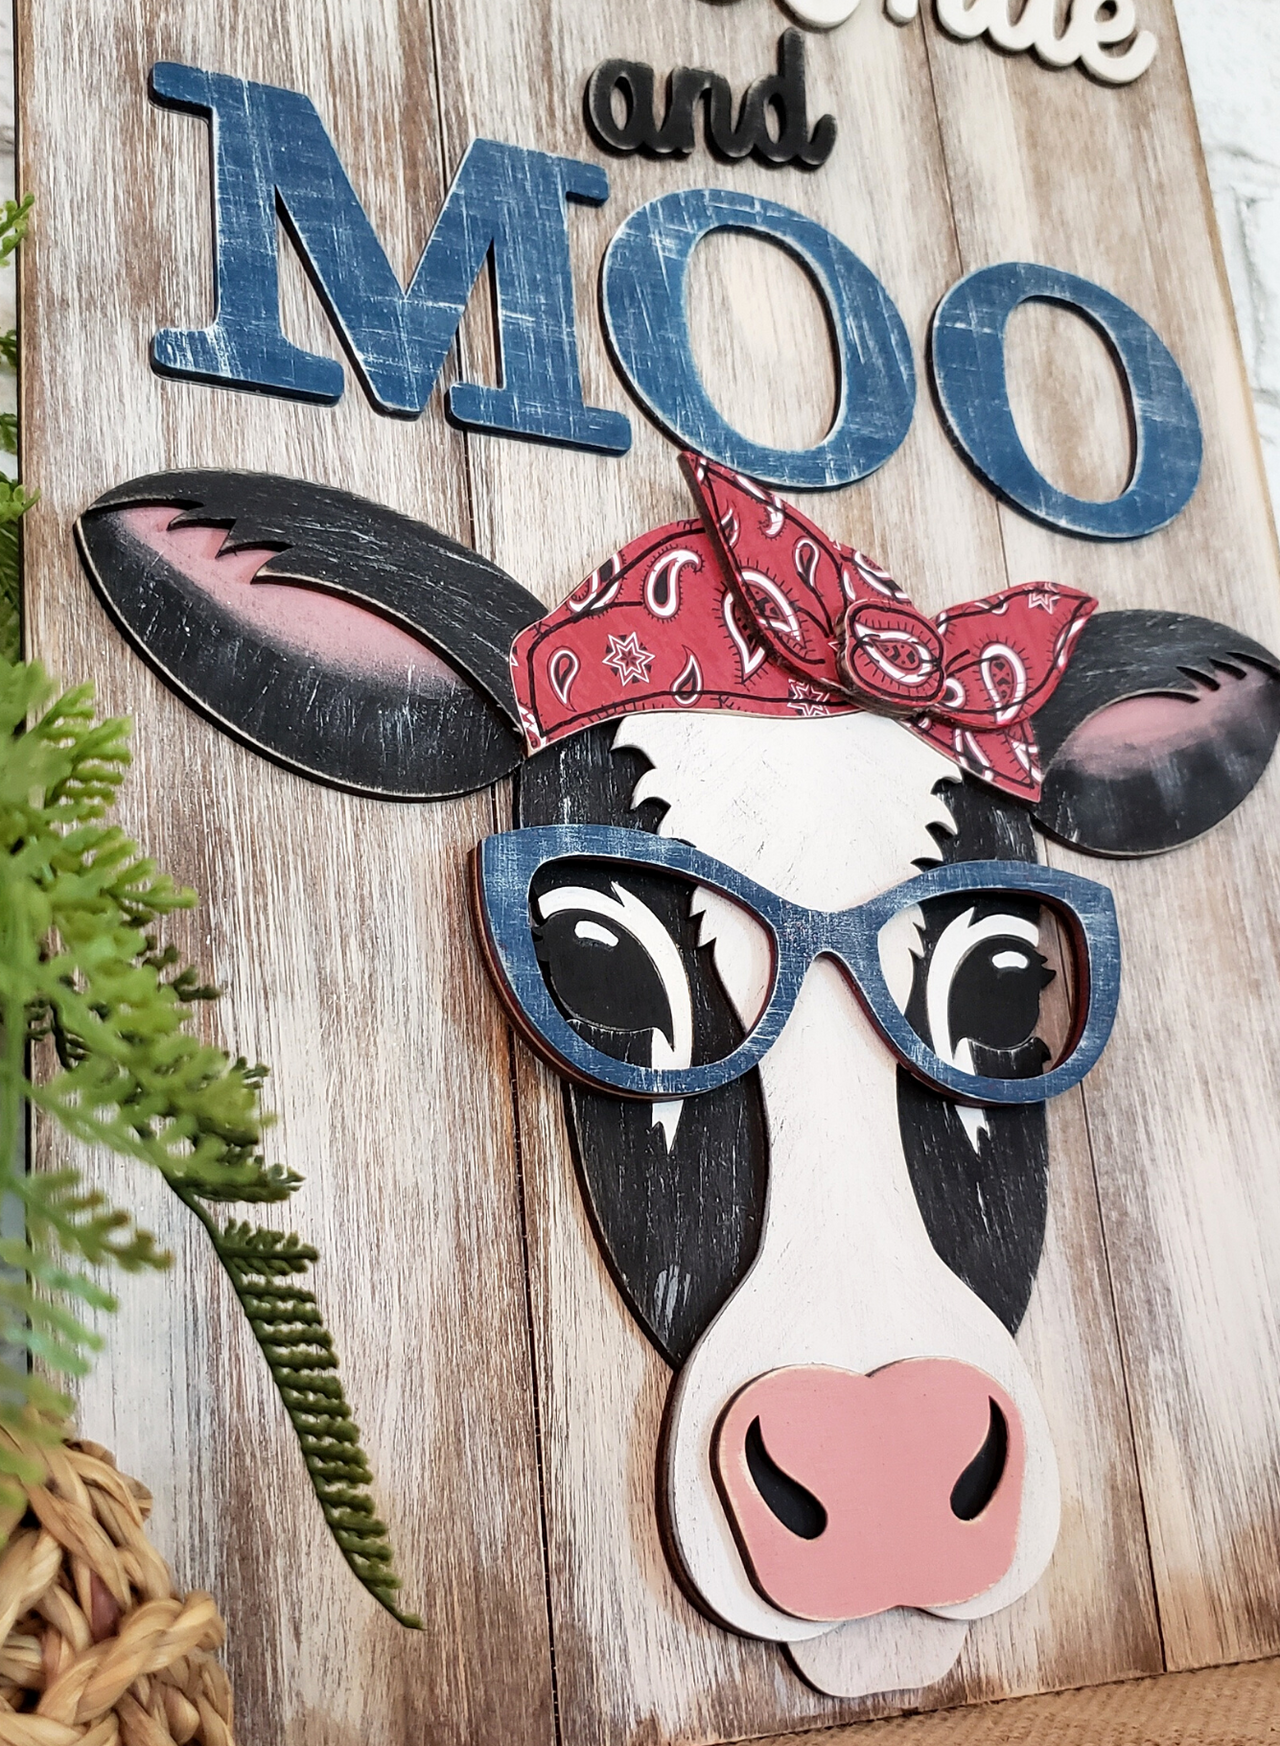 Red, White and Moo 3-D Layered Wood Blank